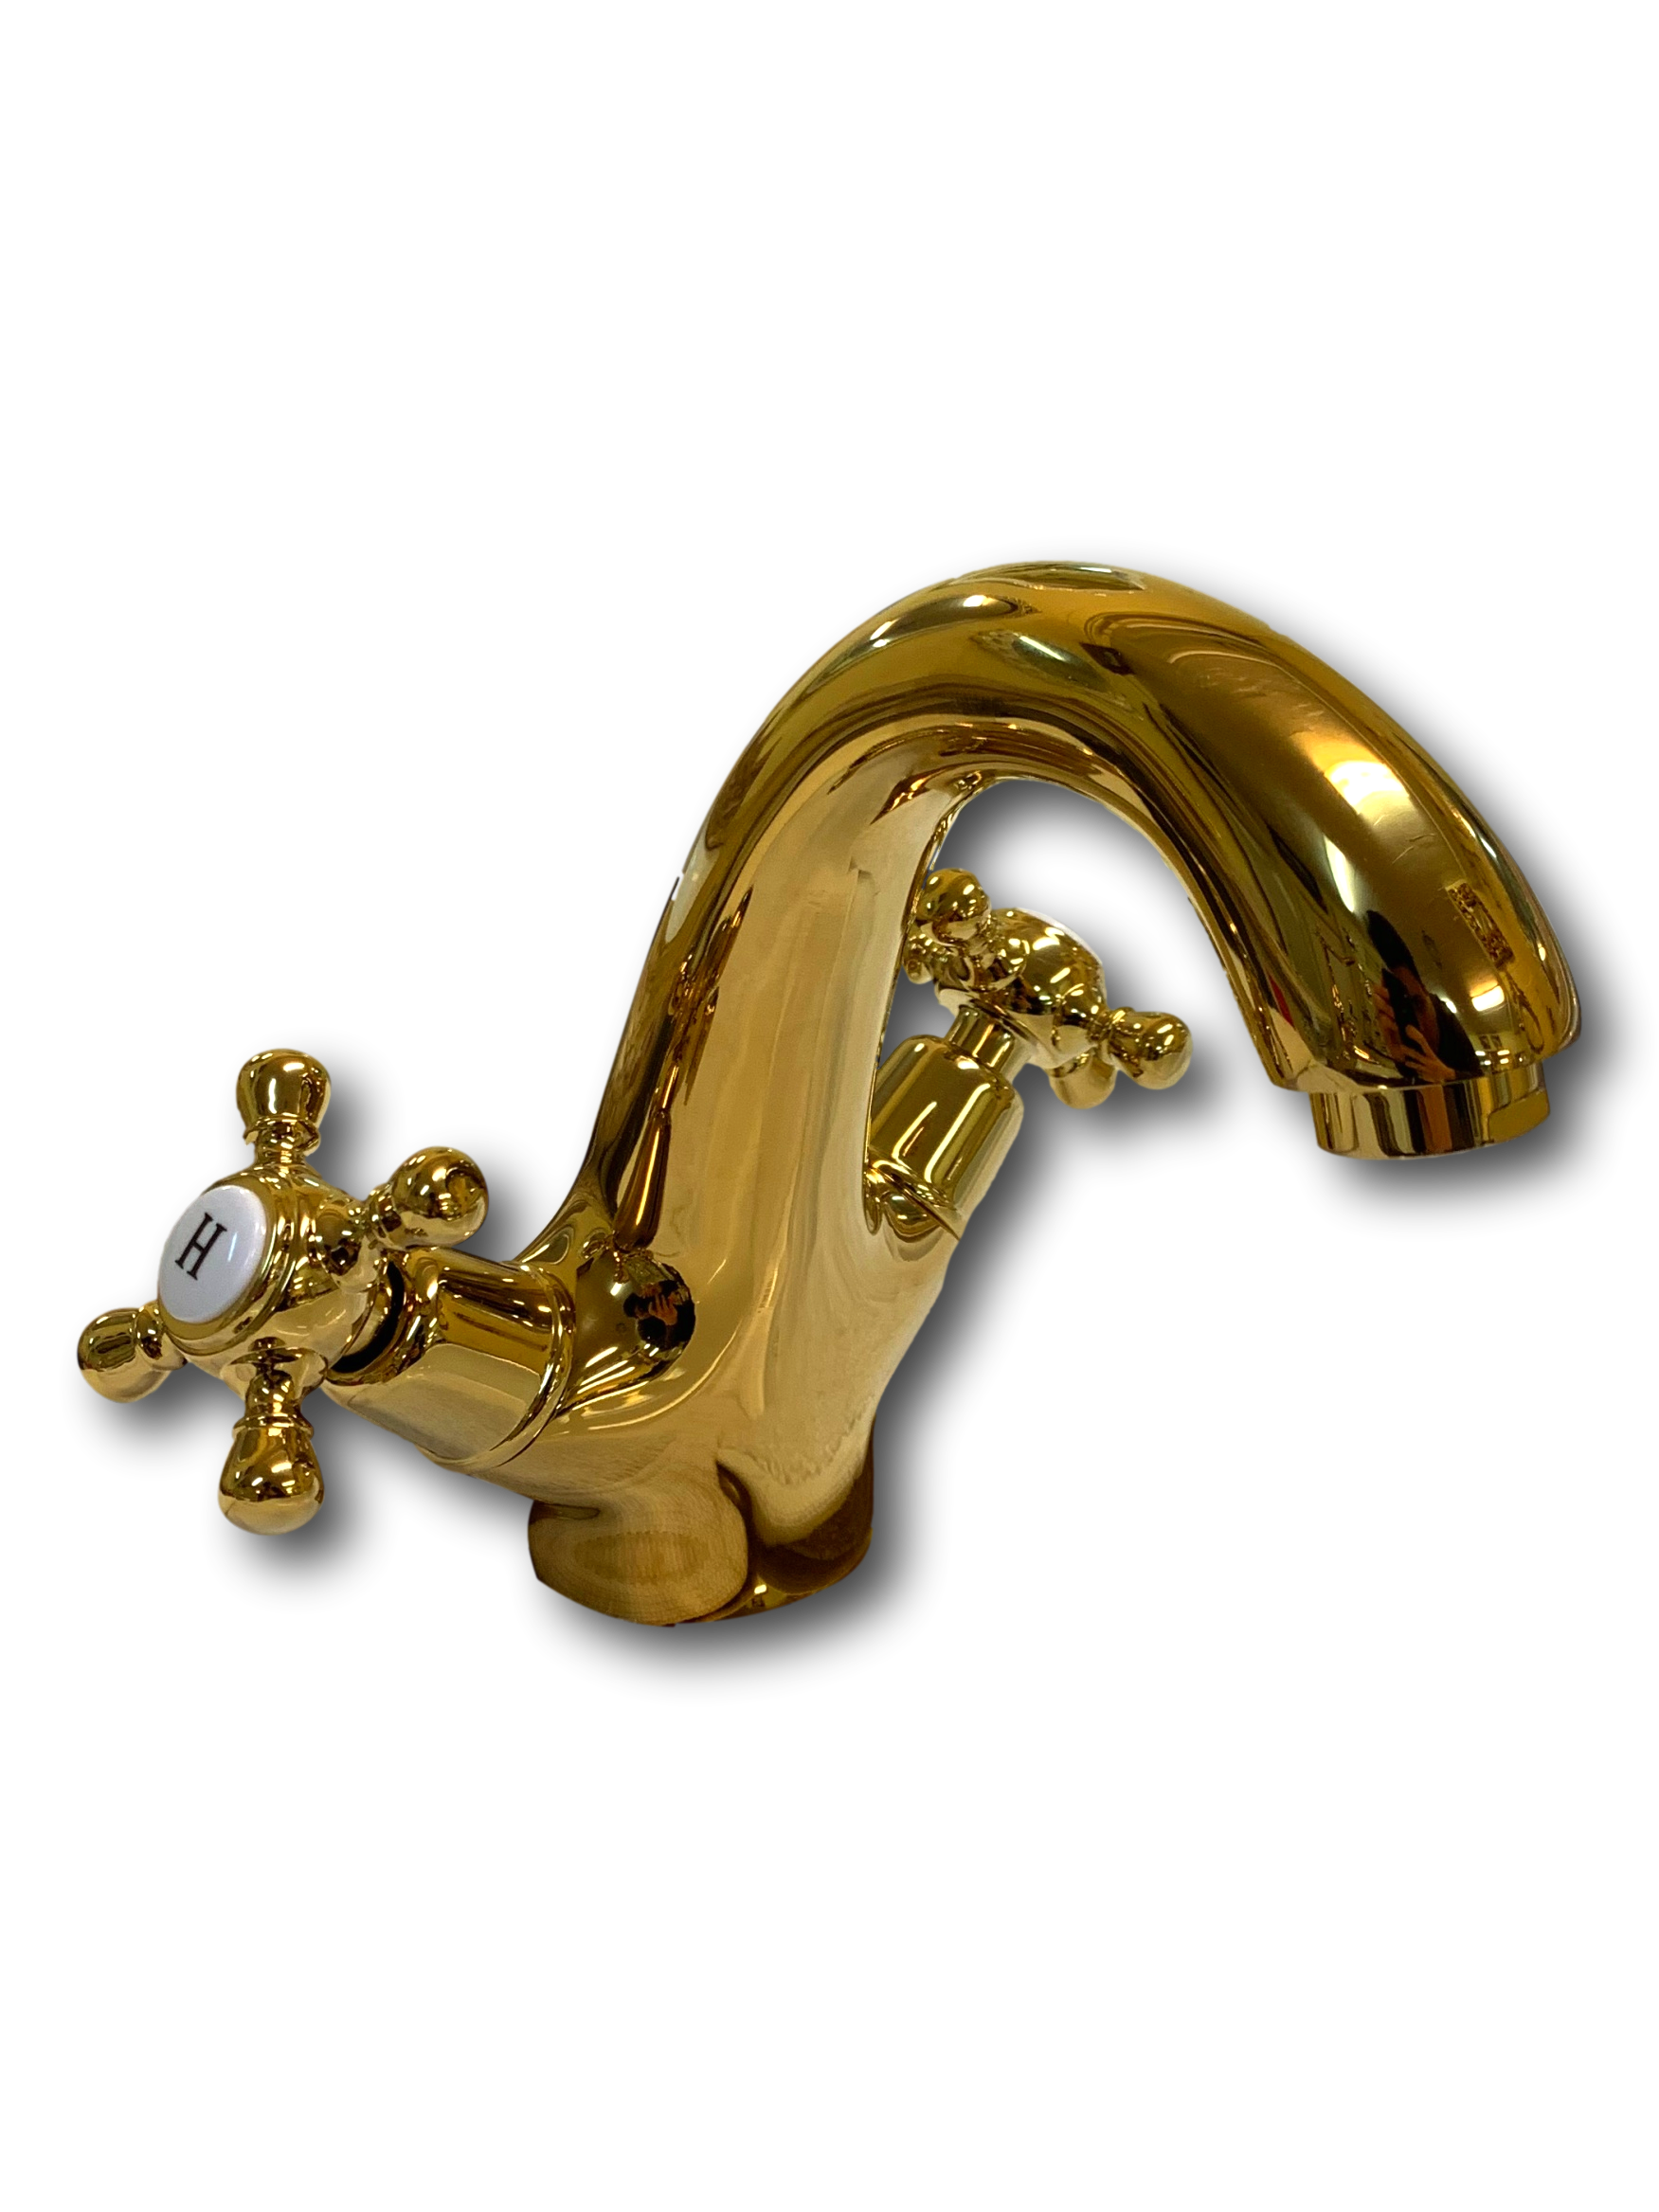 Luxury Swan Bathroom Faucet Gold Plated